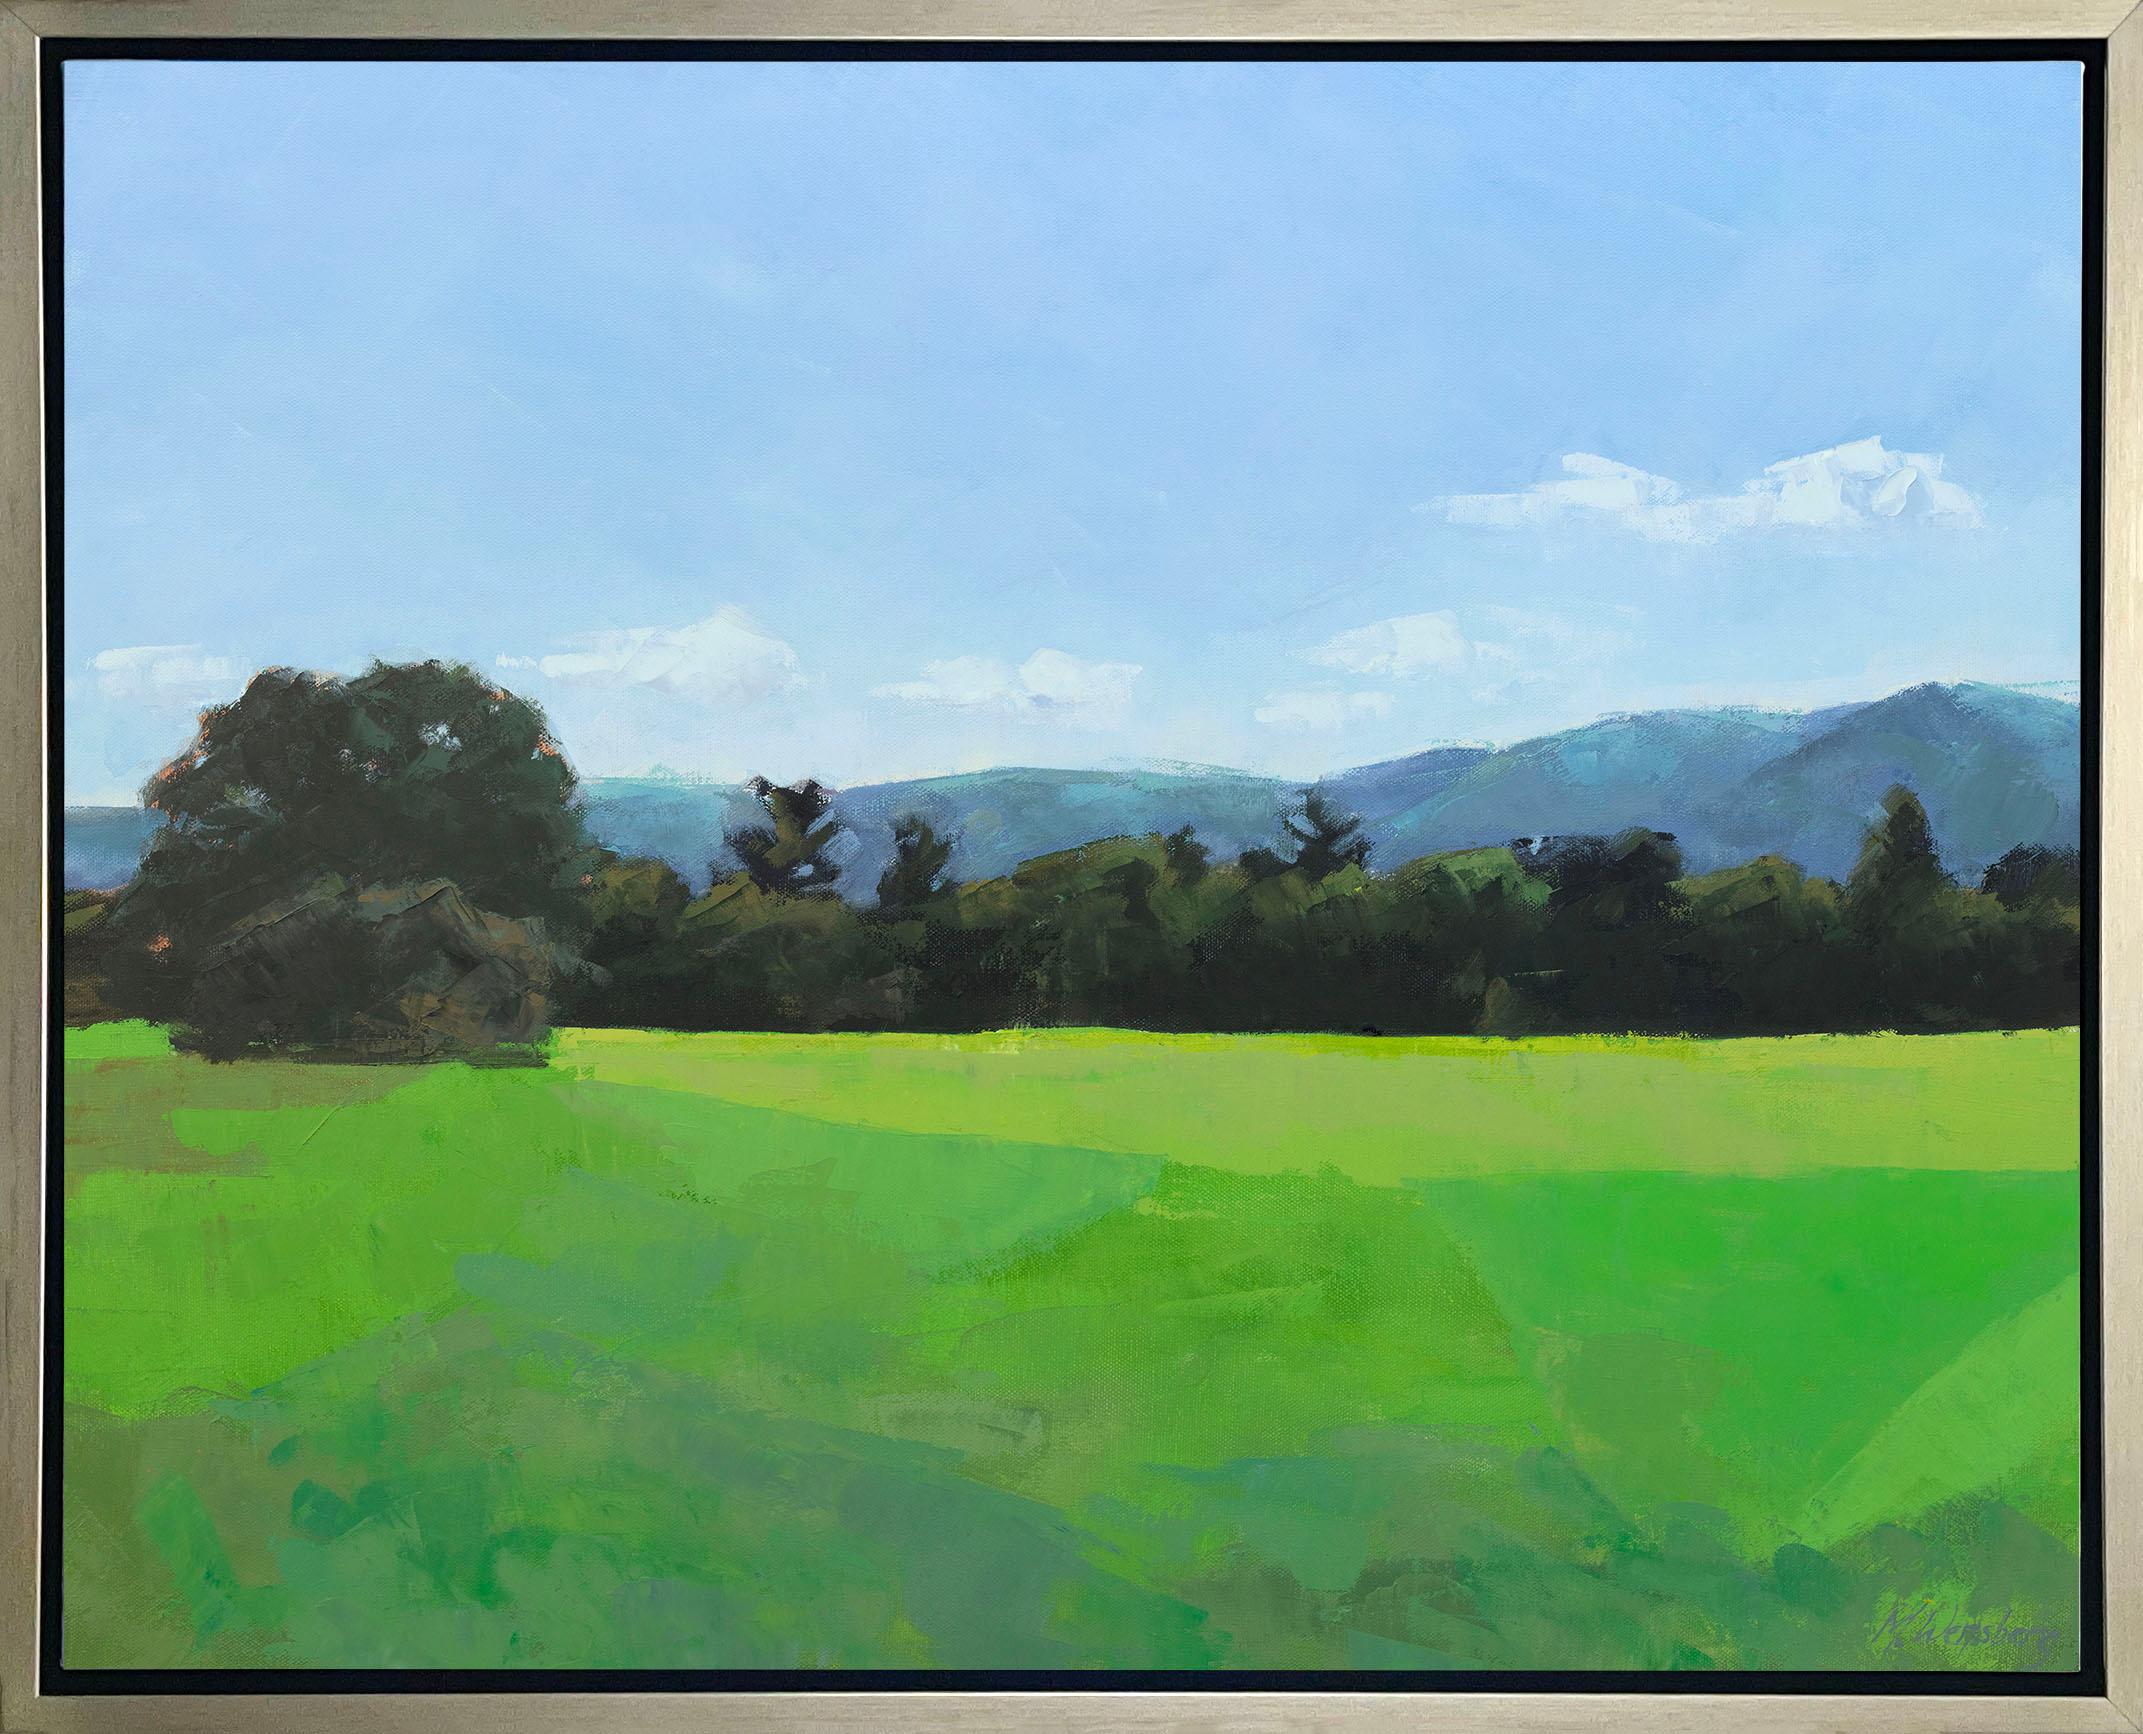 This Limited Edition giclee landscape print by Molly Doe Wensberg is an edition size of 195. It features a vibrant green and blue palette and captures a scene of a field with lush foliage and rolling hills behind it. Printed on canvas, this giclee